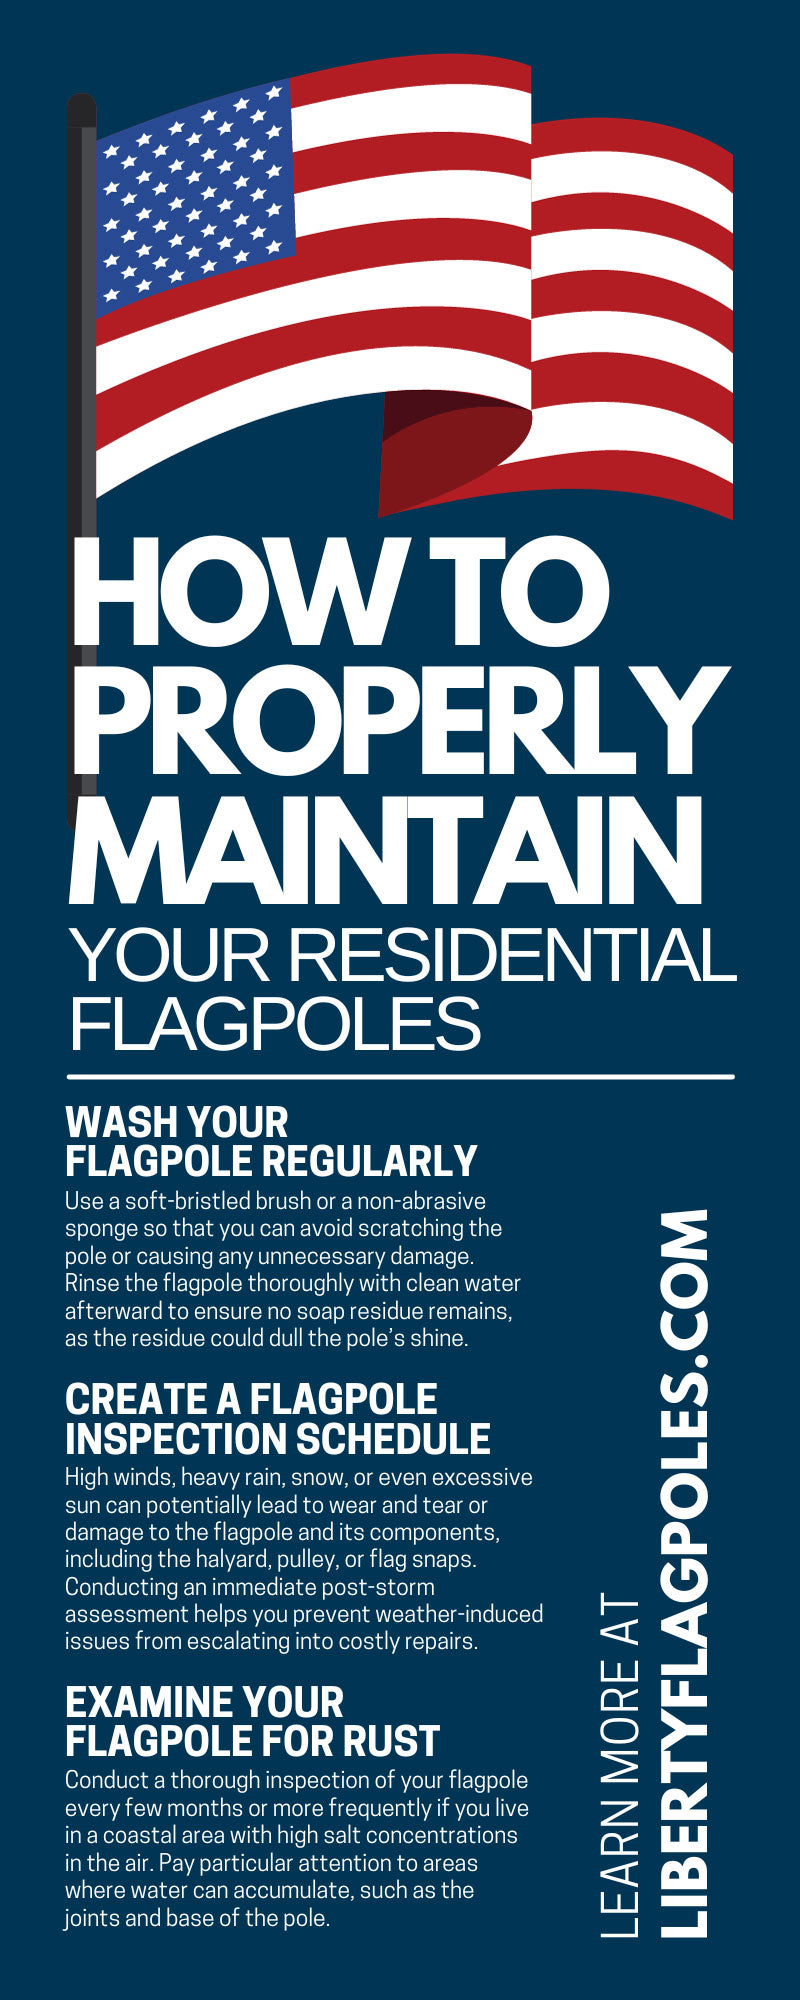 How To Properly Maintain Your Residential Flagpoles